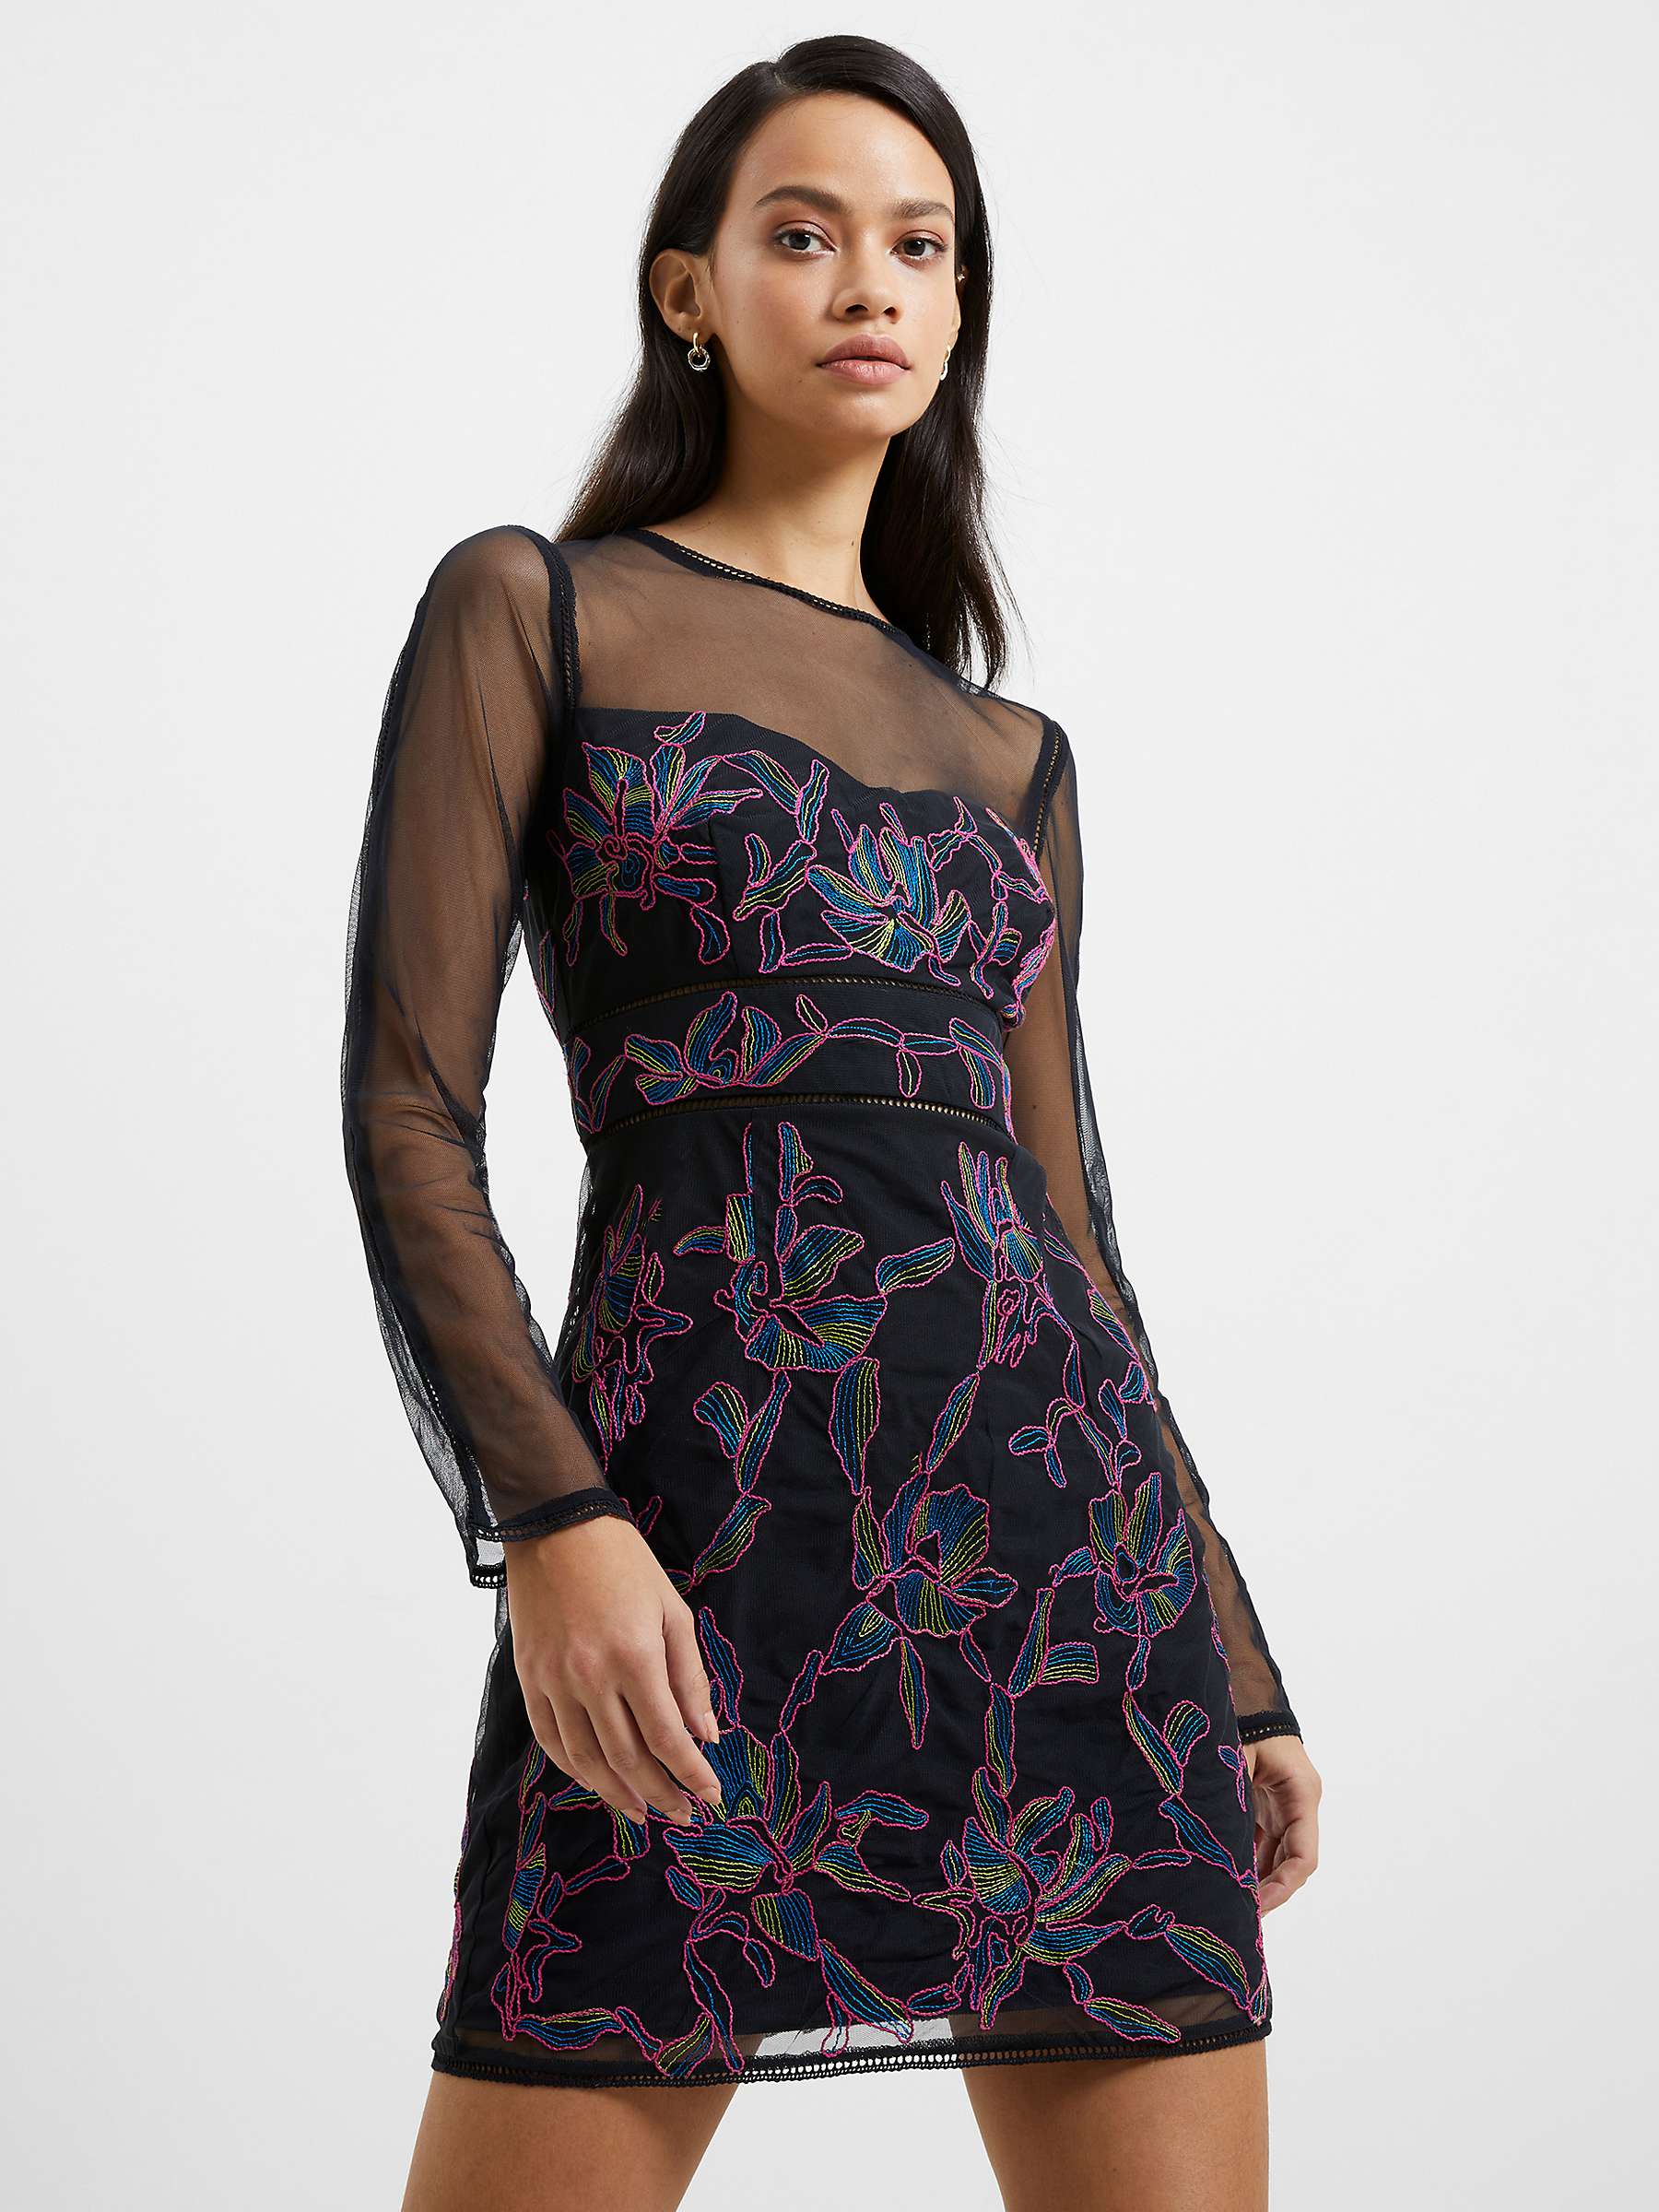 Buy French Connection Emilia Embroidered Dress, Black/Multi Online at johnlewis.com